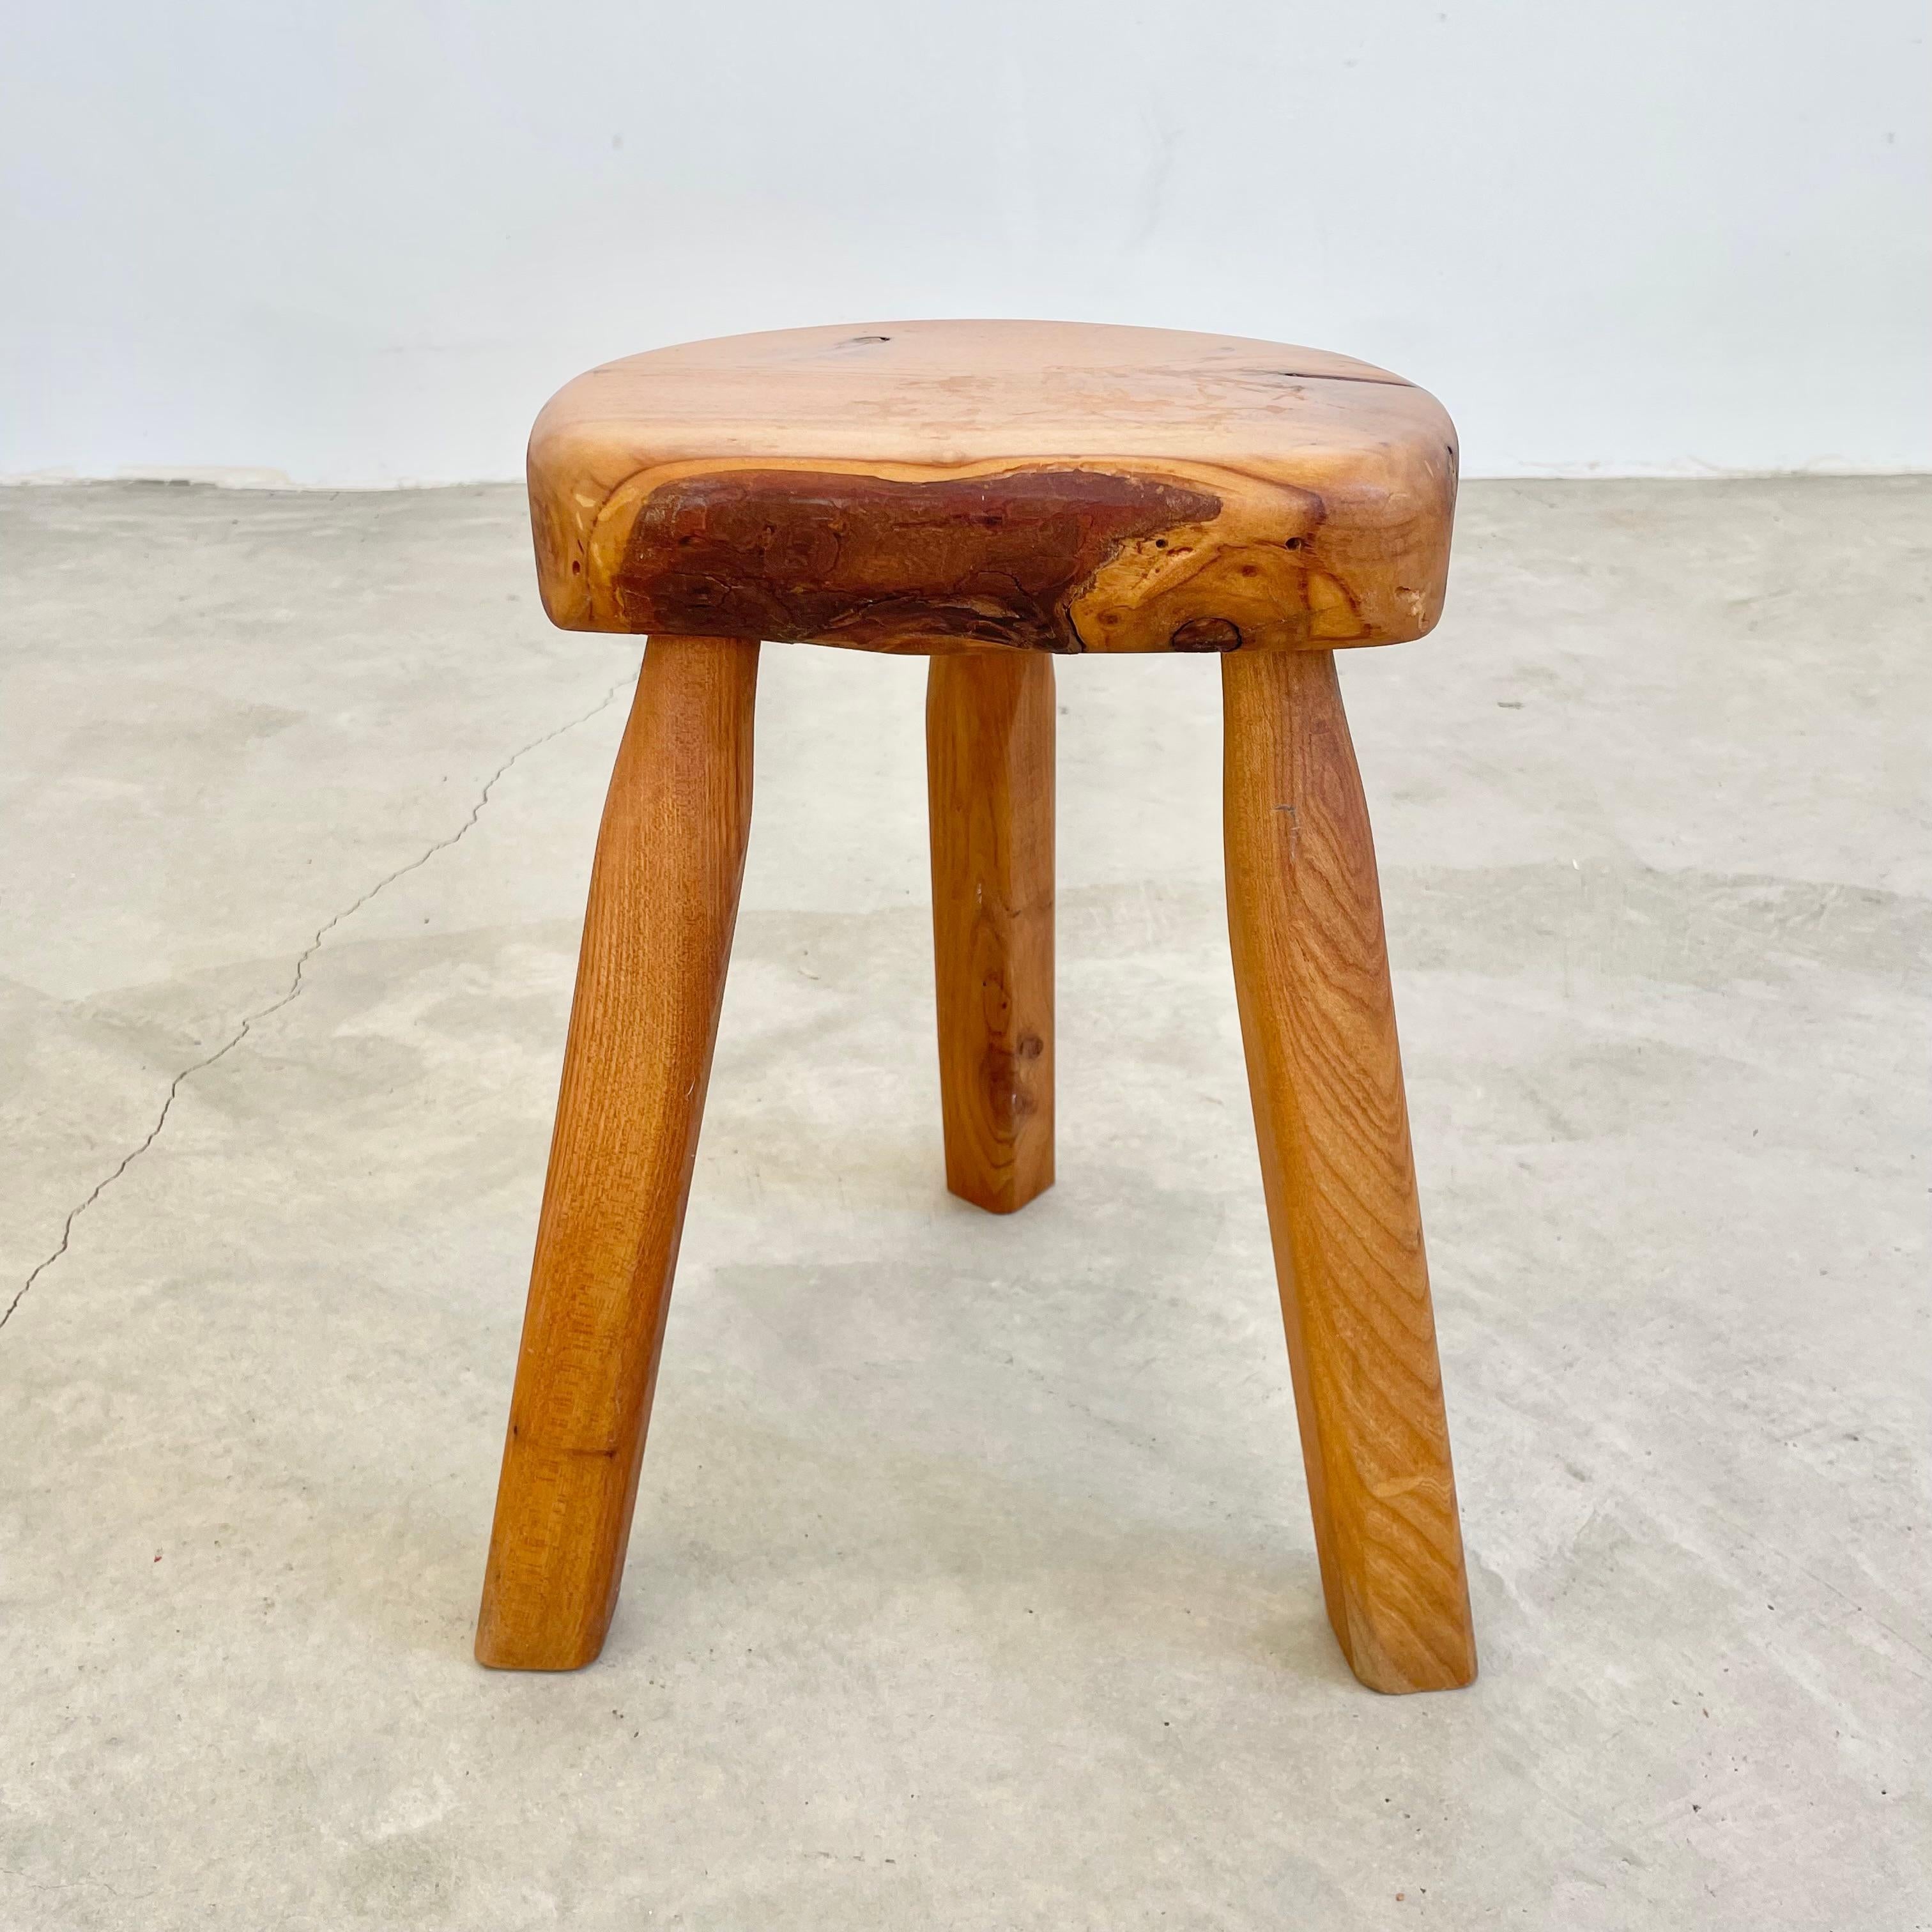 Sturdy wooden tripod stool made in France, circa 1970s. Substantial and chunky seat with sturdy club legs that taper in slightly at the top. Great coloring and wood grain give this stool tremendous patina and character. Functional stool. Perfect for